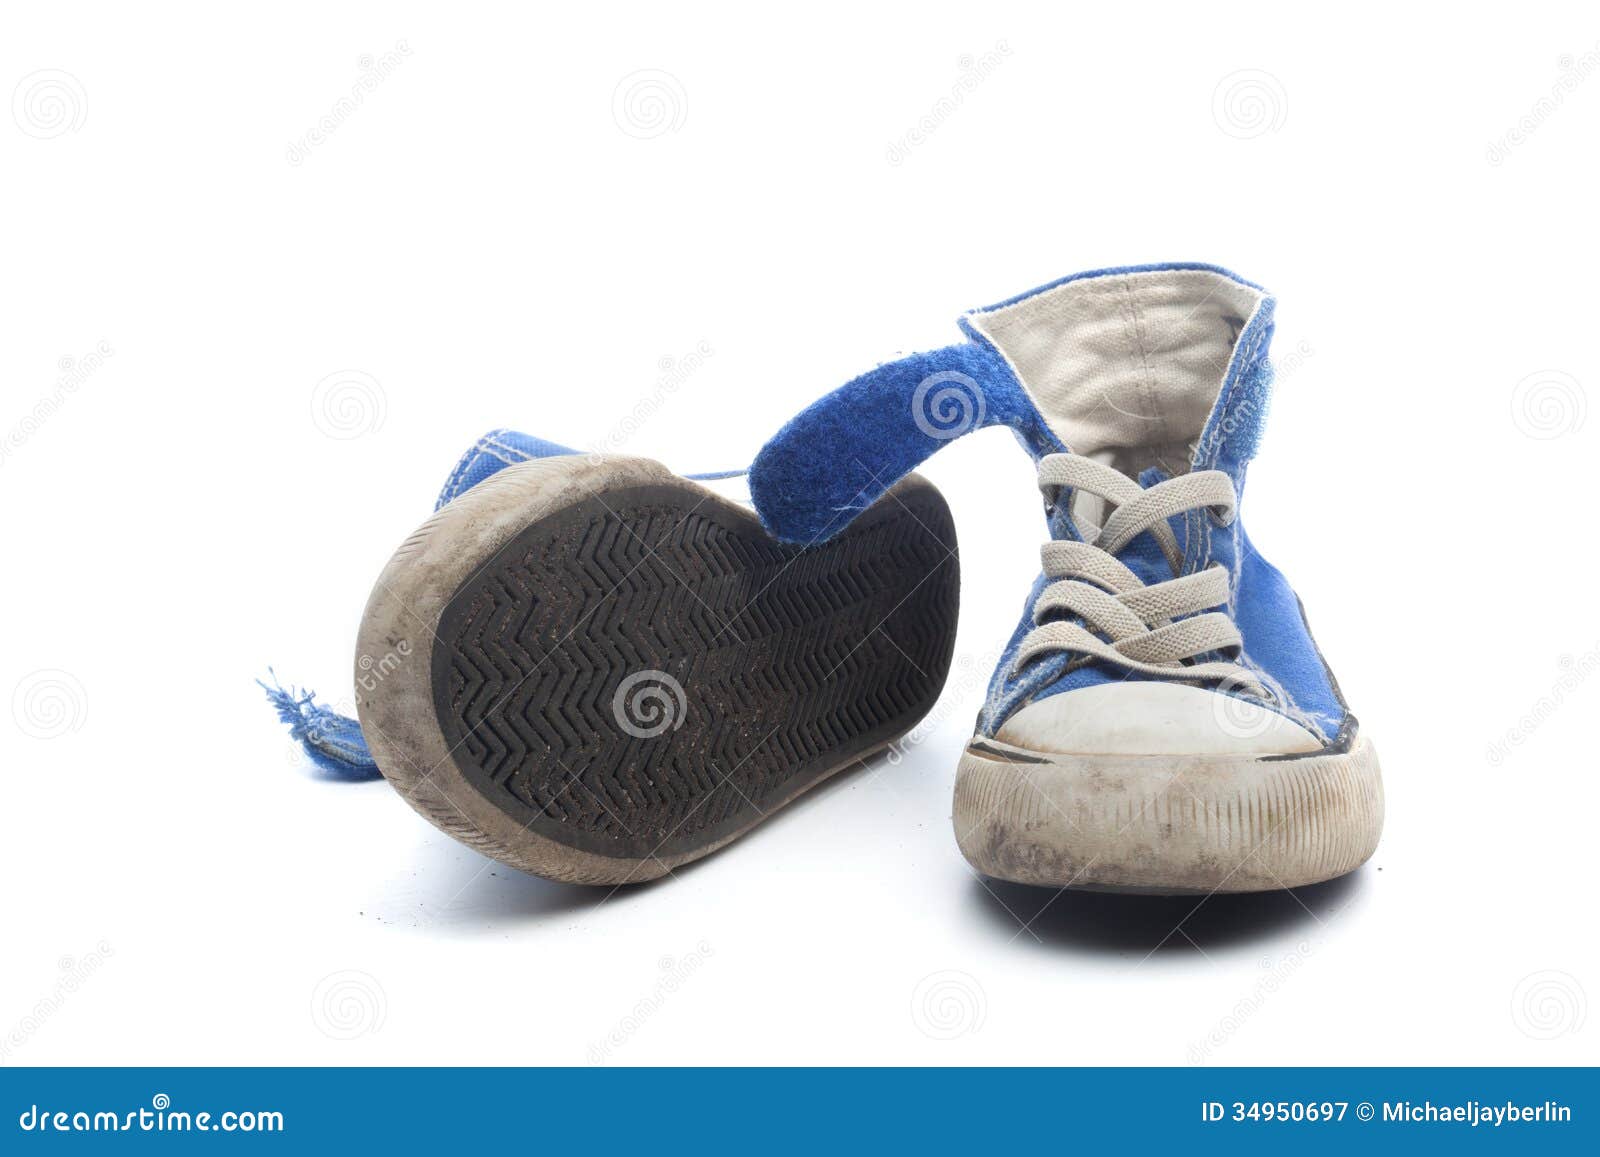 Pair of Dirty, Worn Out Blue Children Sneakers Stock Image - Image of ...